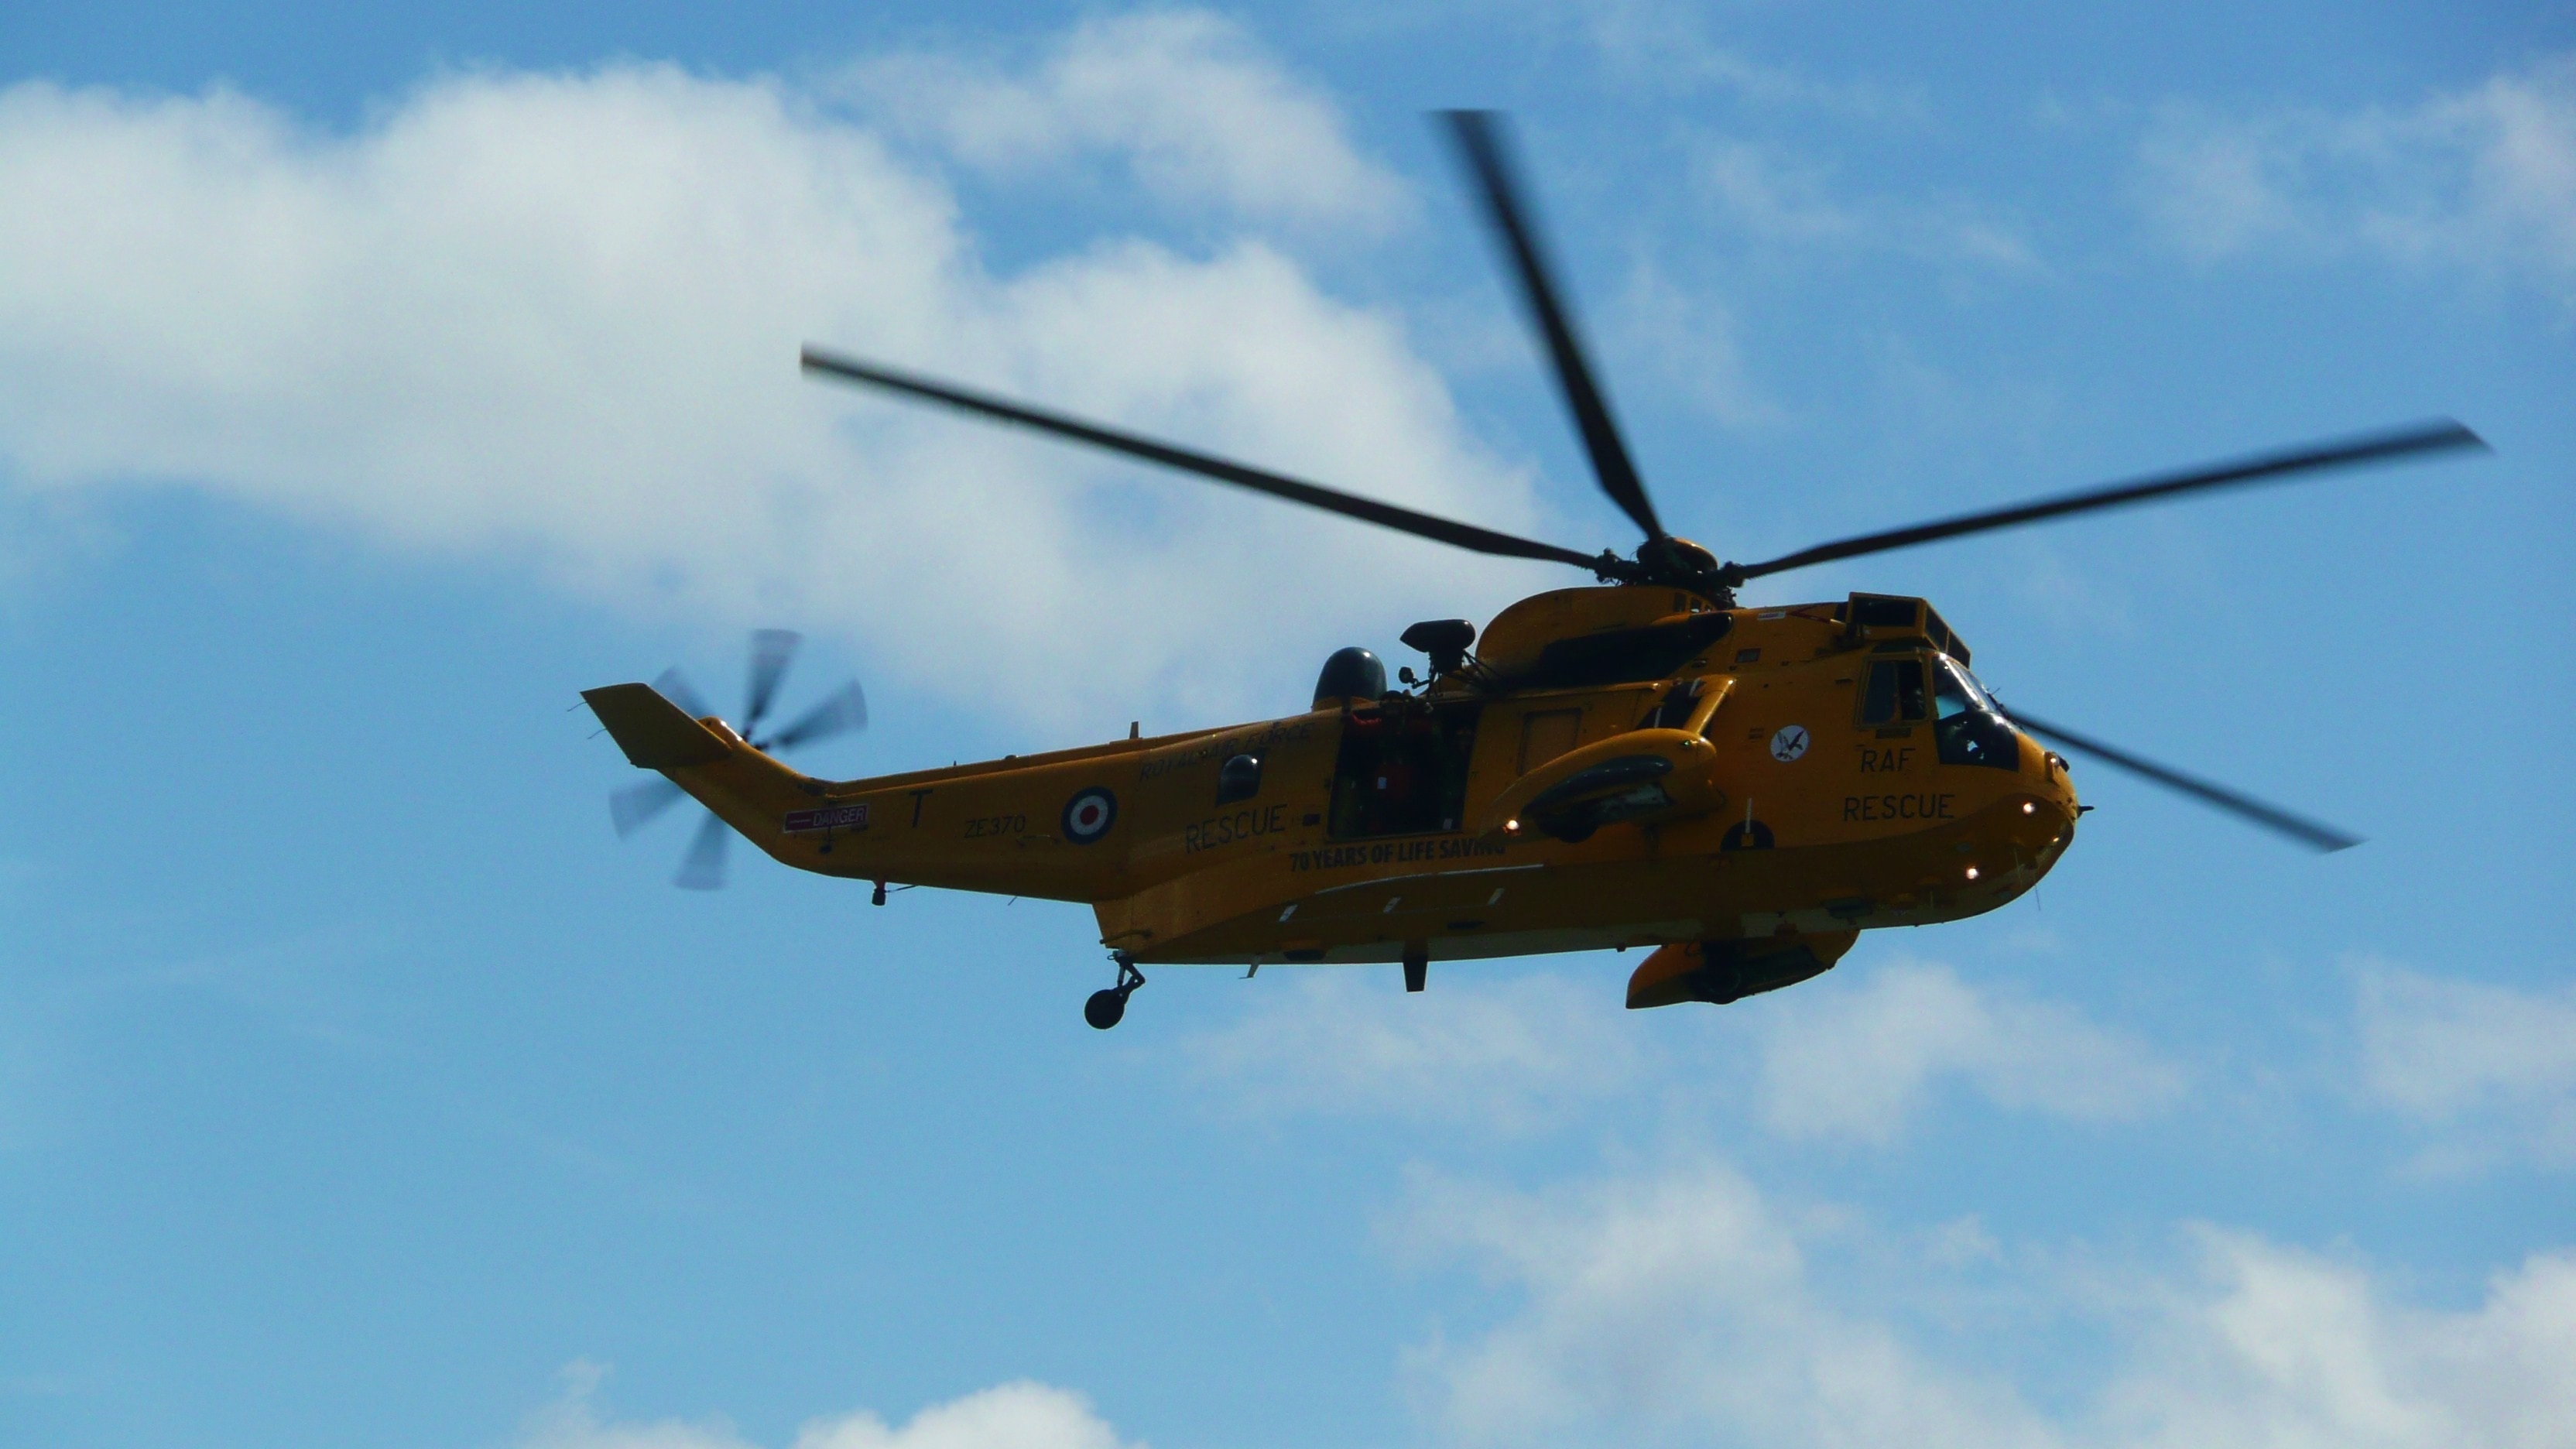 yellow helicopter